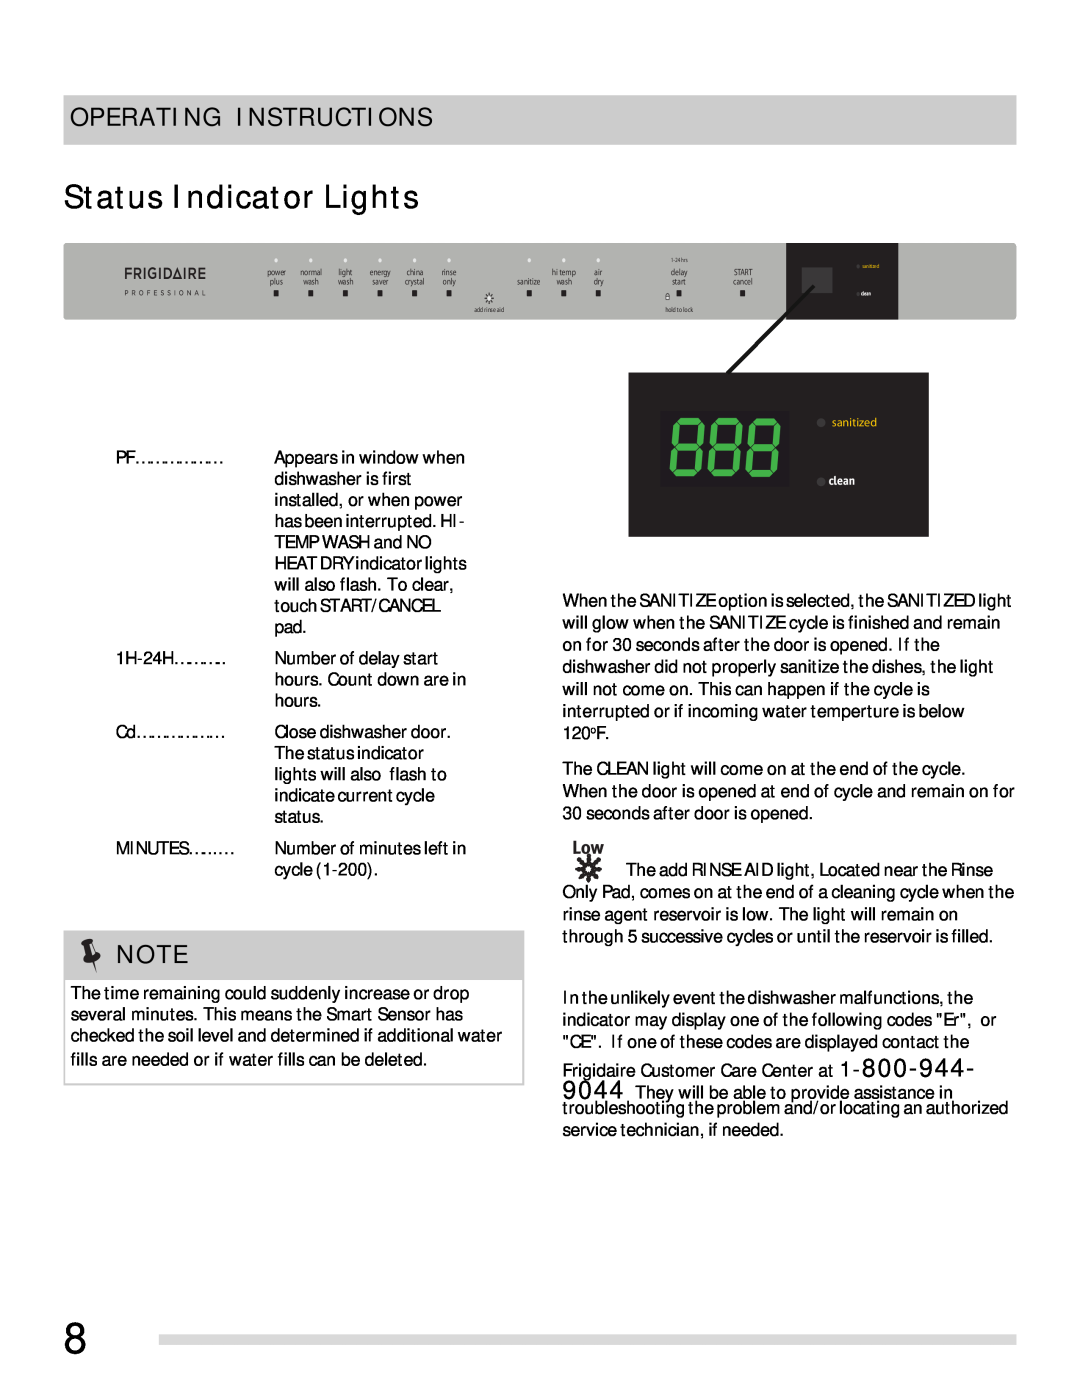 Frigidaire FPHD2491 important safety instructions Status Indicator Lights, Operating Instructions 